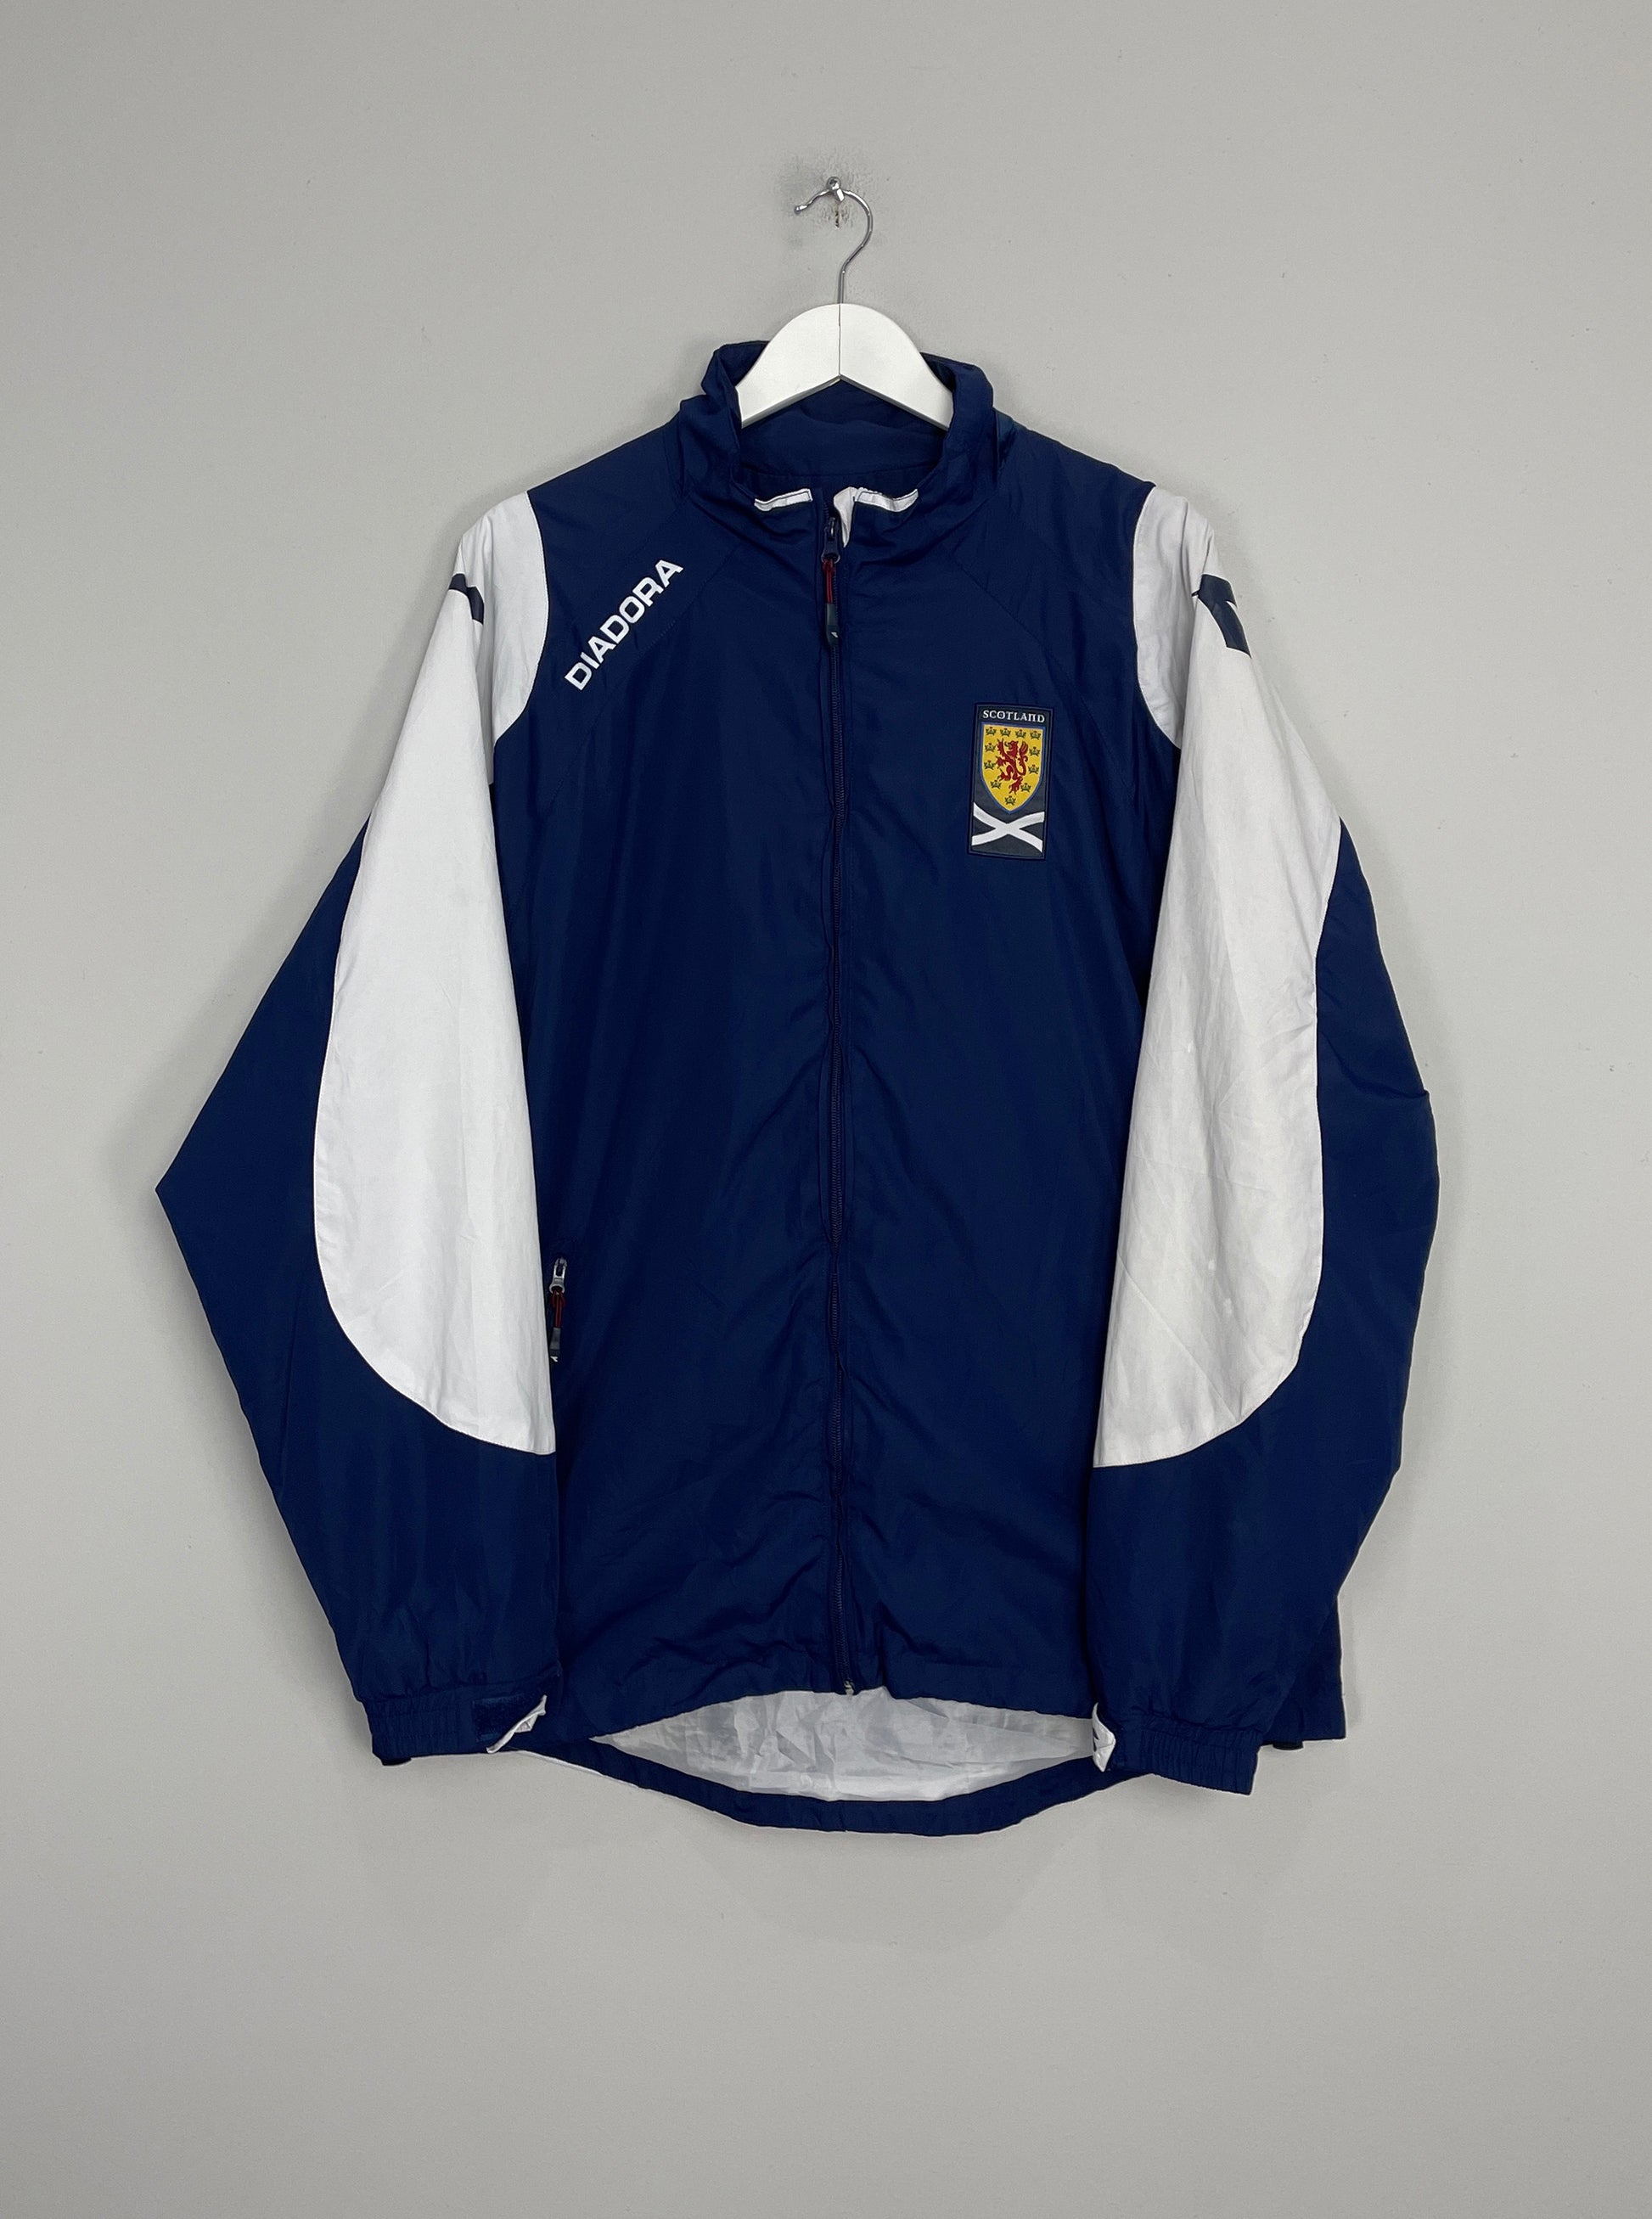 Image of the Scotland shirt from the 2005/06 season